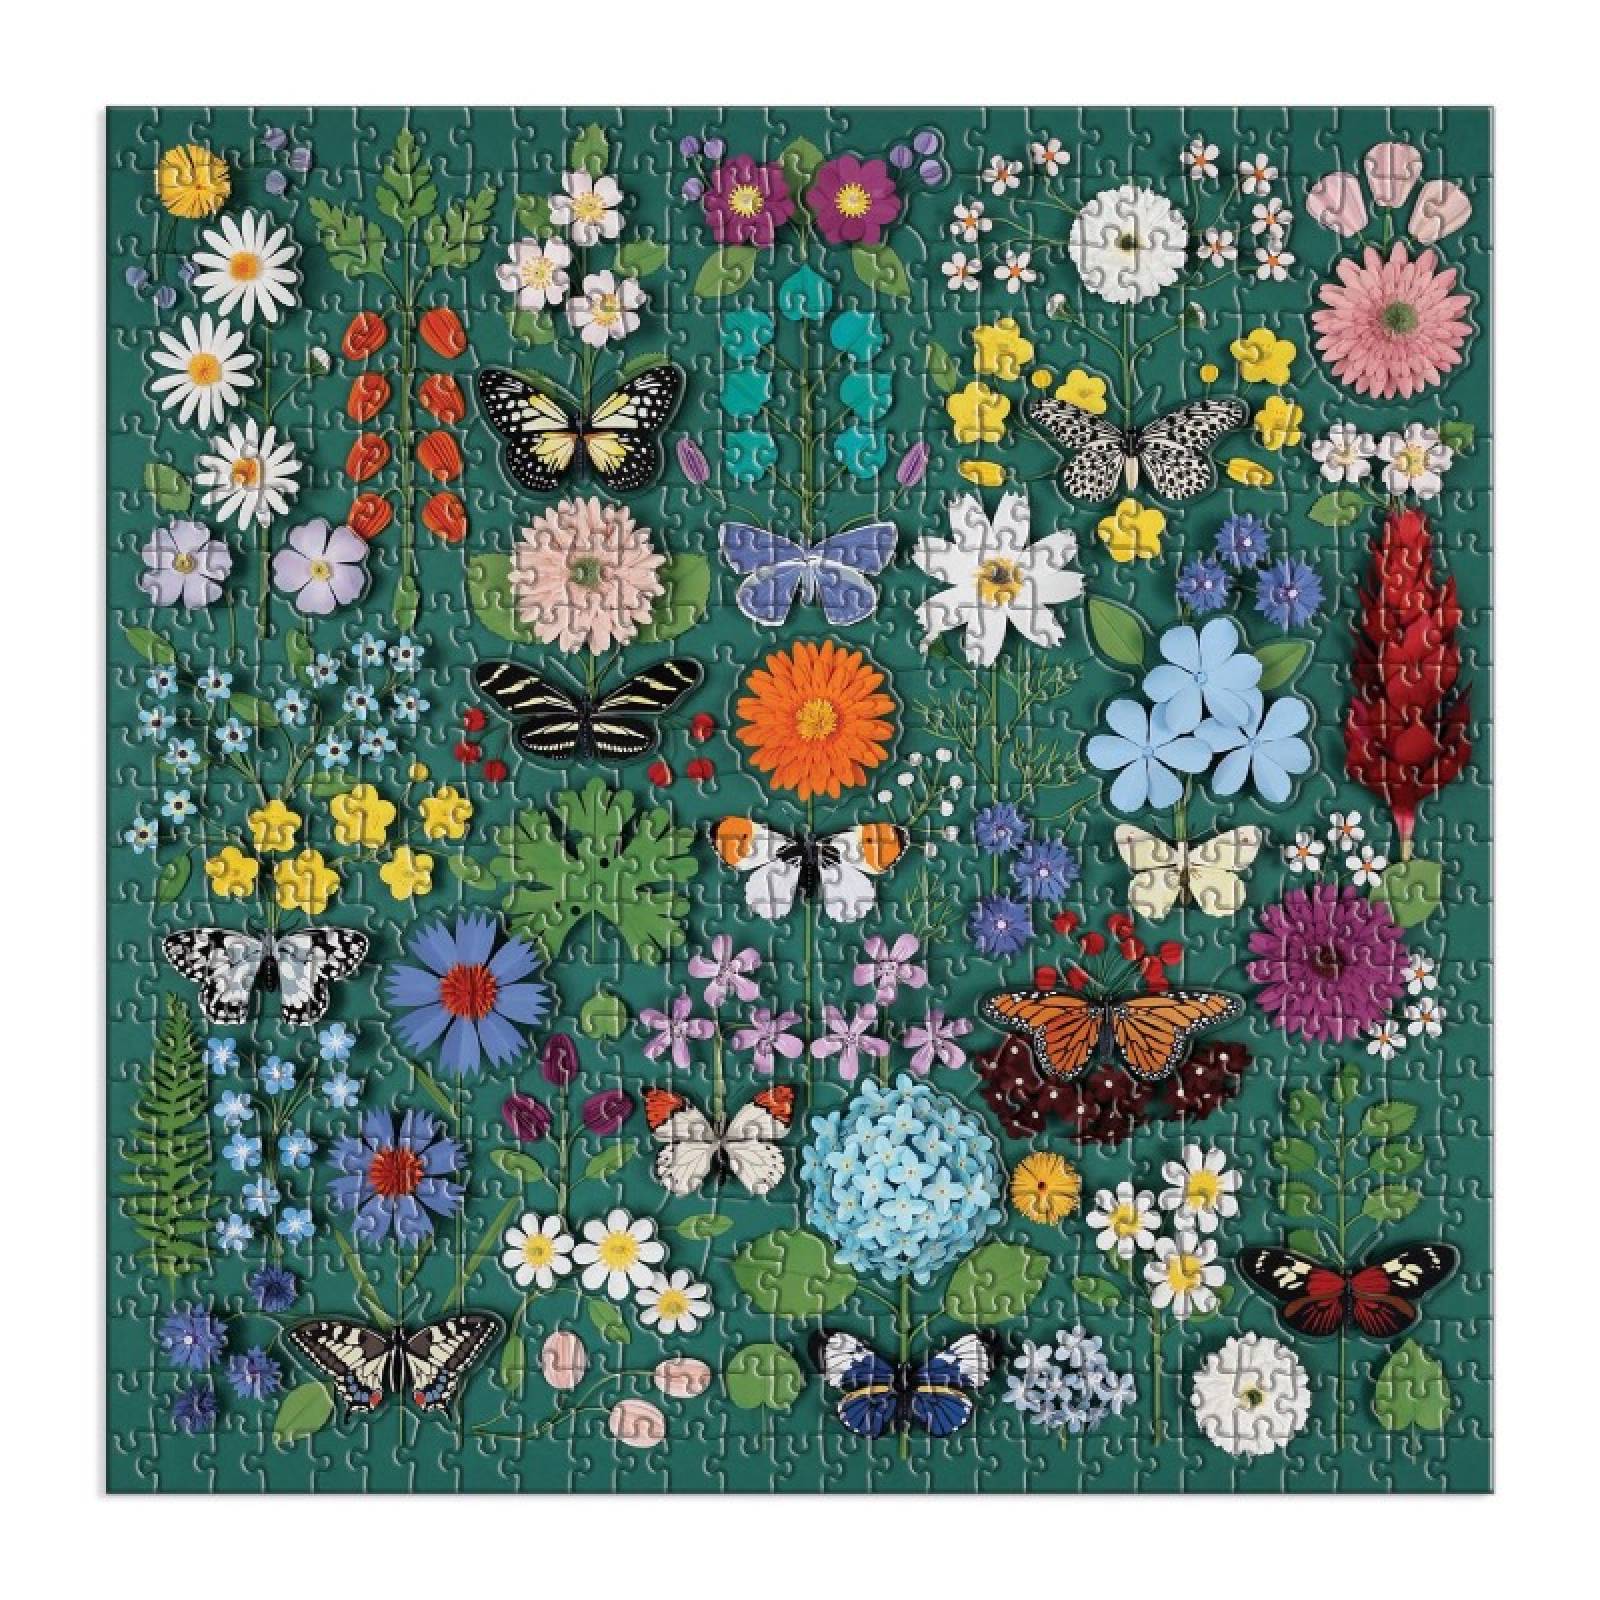 Butterfly Botanica - 500 Piece Jigsaw Puzzle thumbnails